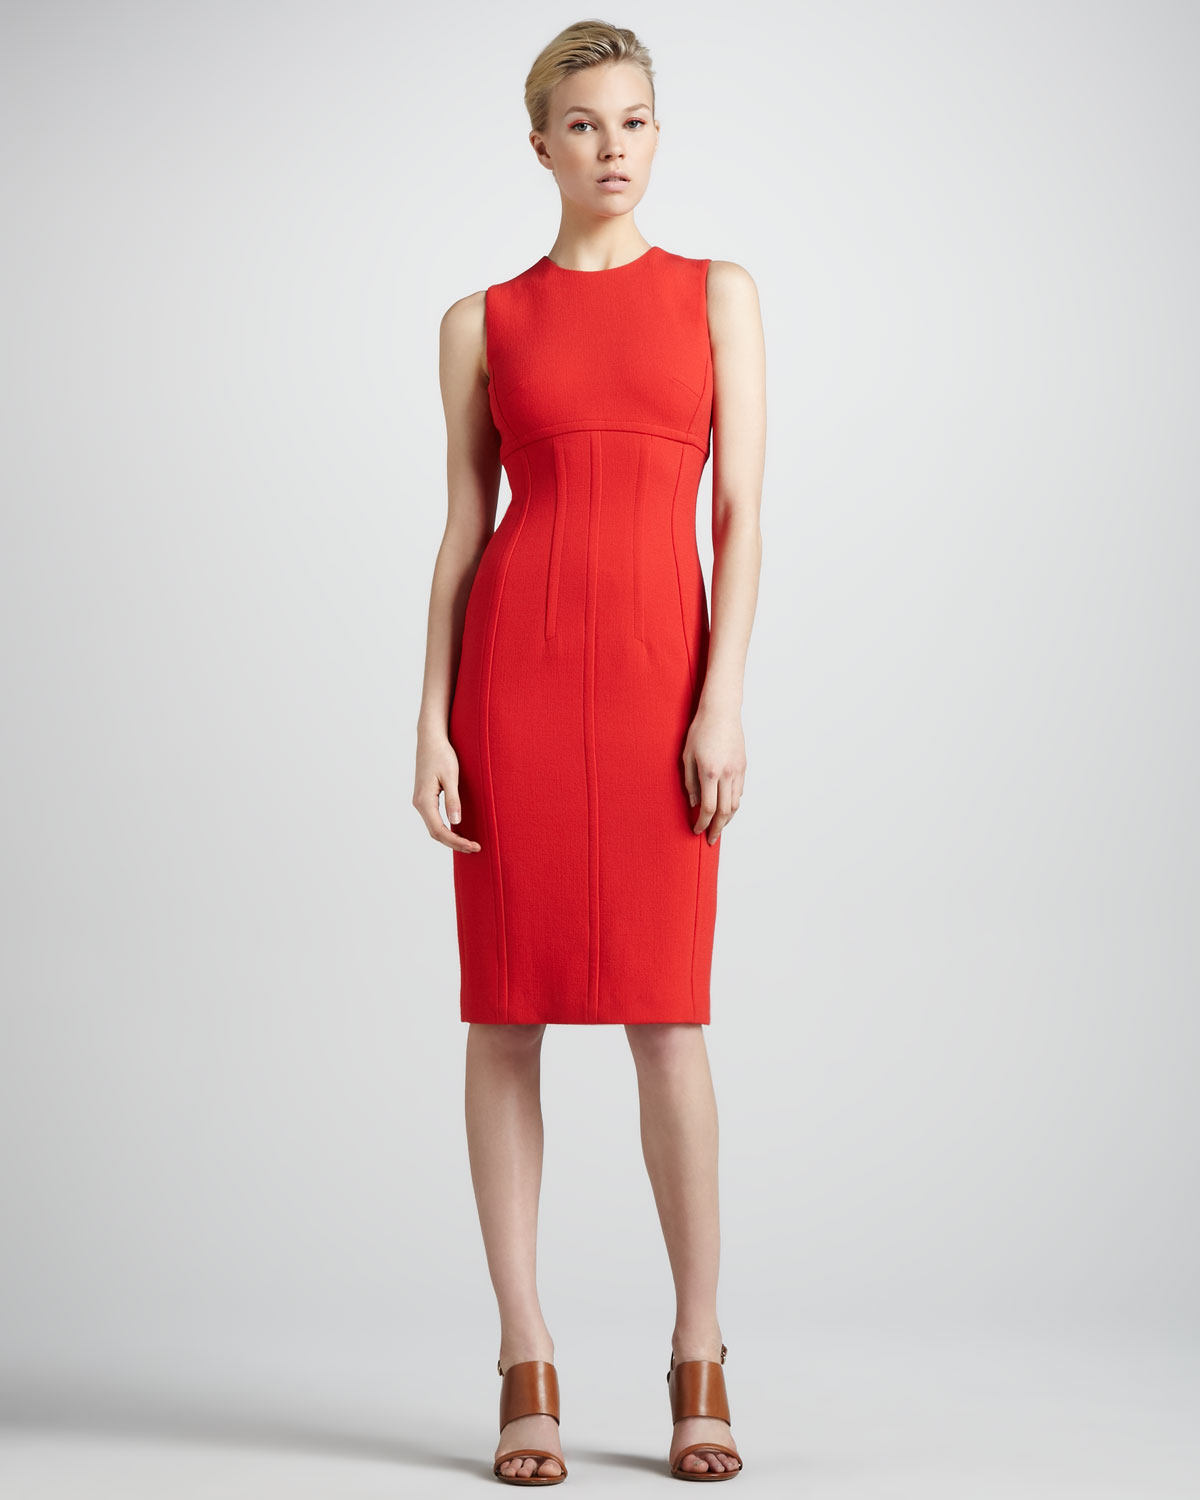 Michael Kors Boucle Sheath Dress in Coral (Red) - Lyst